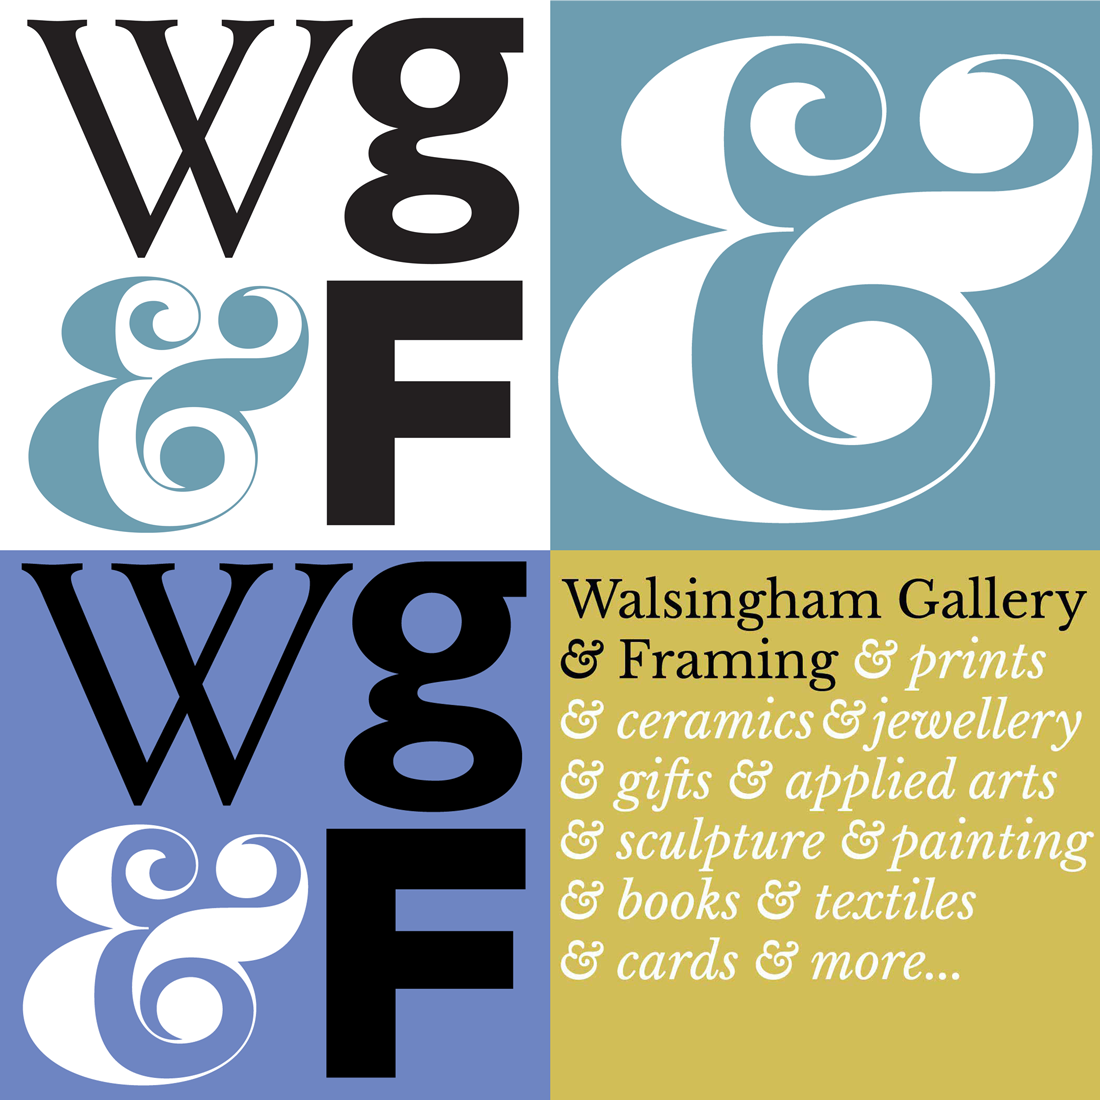 Walsingham Gallery and Framing branding and logo and favicon